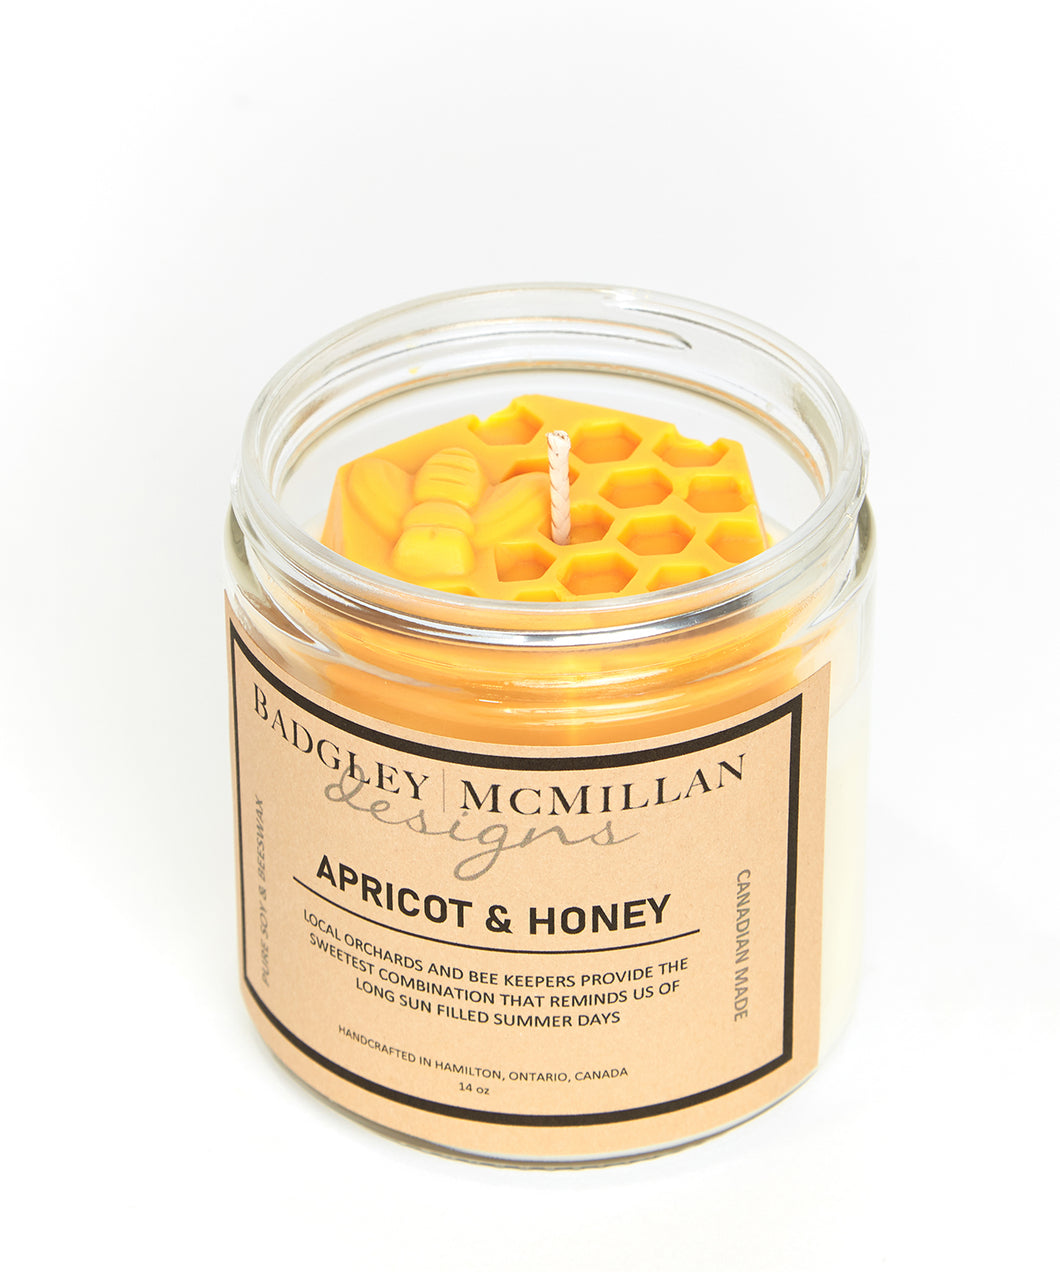 Apricot & Honey Specialty 14 oz Soy Jar Candle